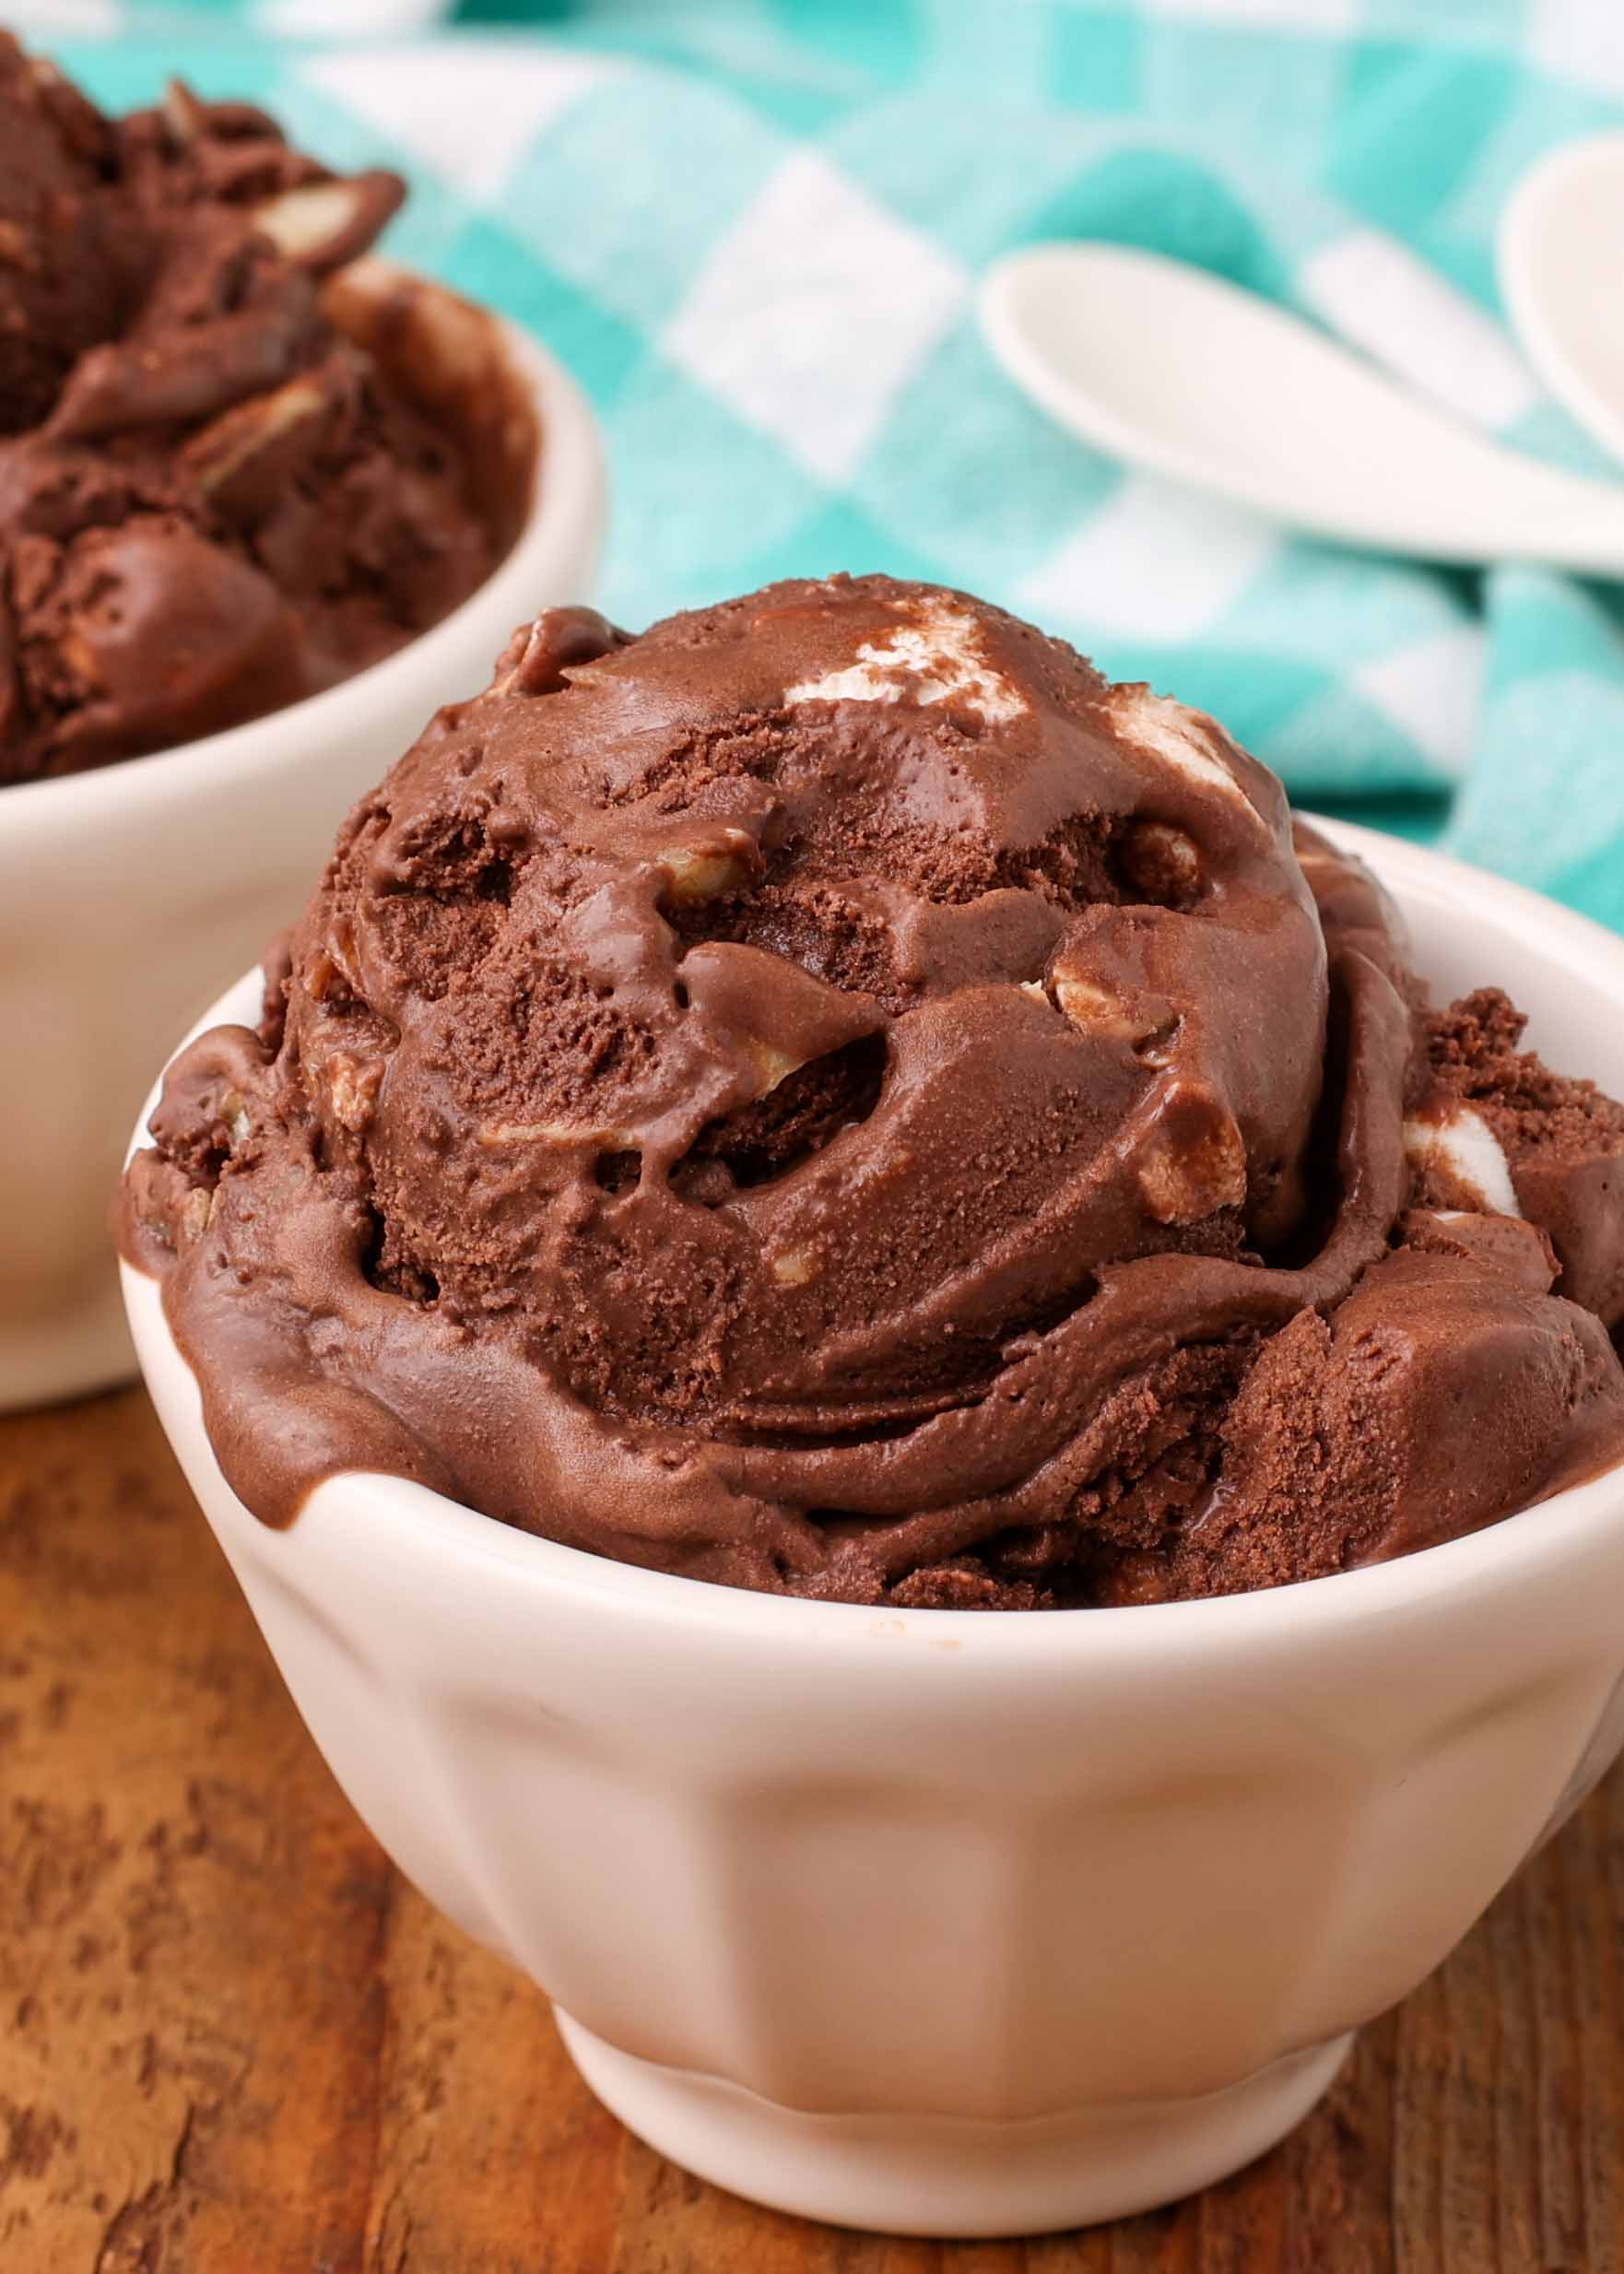 This 3-ingredient ice cream recipe comes together in less than 15